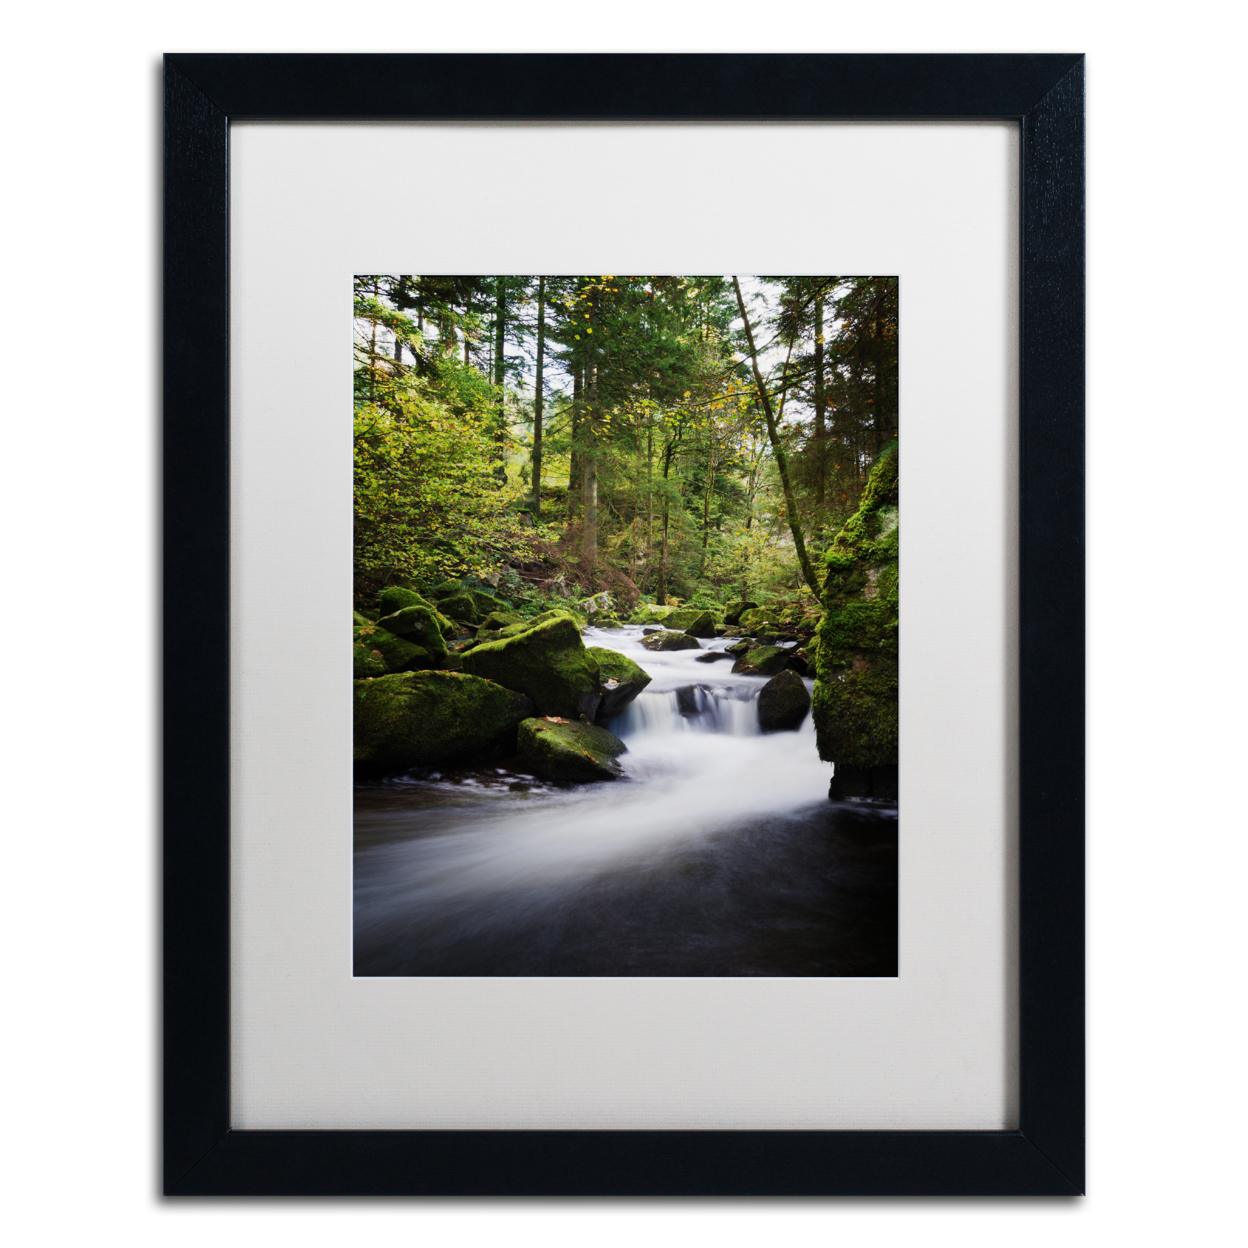 Philippe Sainte-Laudy 'Waterfall In The Forest' Black Wooden Framed Art 18 X 22 Inches